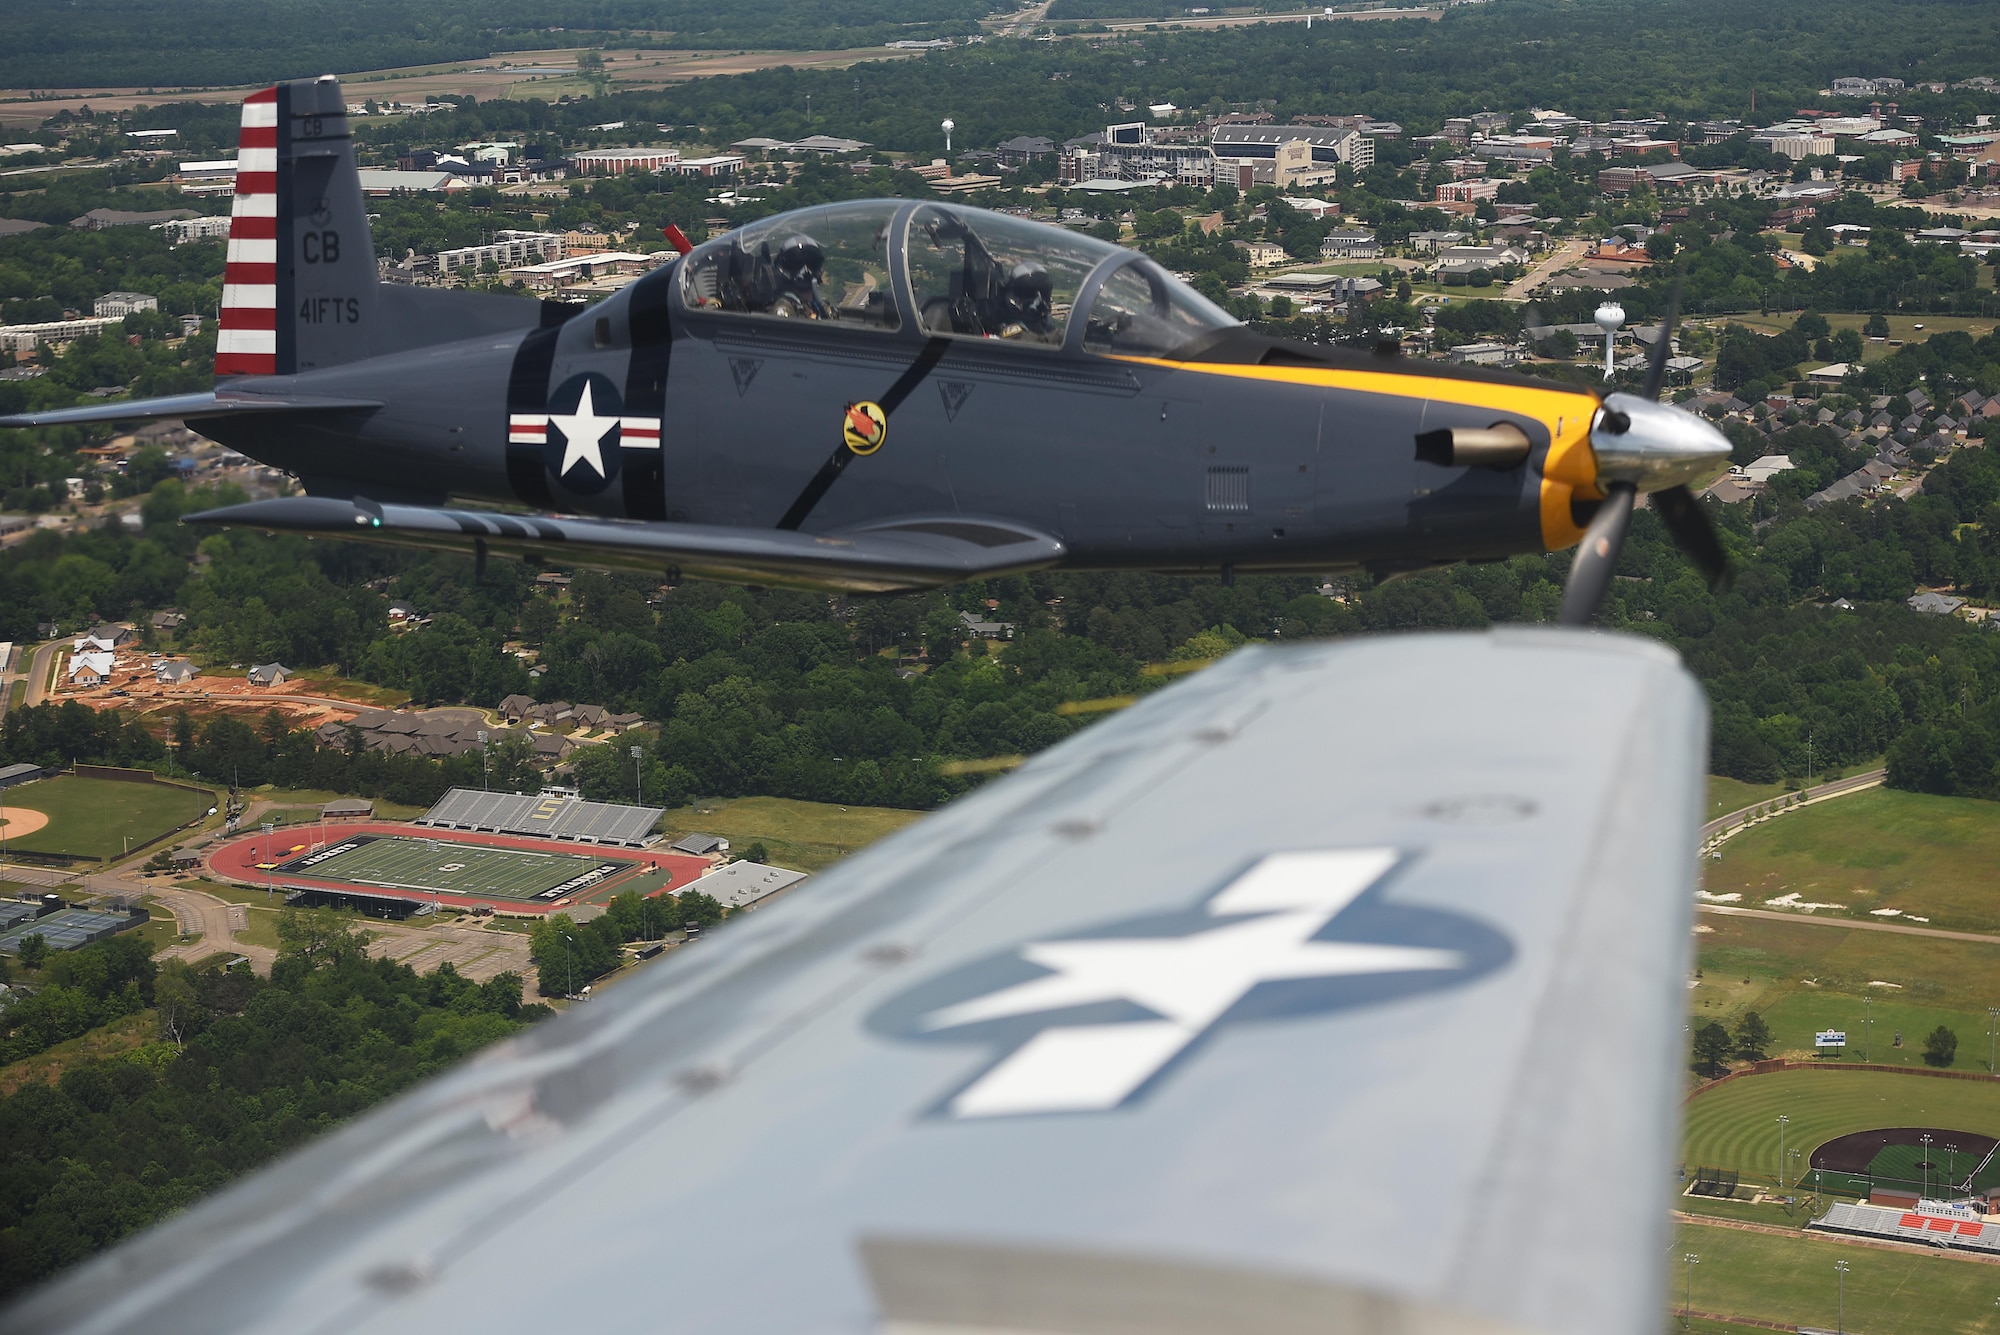 A T-6 Texan II flies in a dissimilar formation of aircraft from Columbus Air Force Base, Miss., over Starkville, Miss., May 9, 2020. The flyover was an opportunity to honor the men and women on the front lines in the fight against COVID-19 during the Defense Department’s  #AmericaStrong salute. The flyover consisted of the T-6A Texan II, T-1A Jayhawk and the T-38 Talon. (U.S. Air Force photo by Senior Airman Keith Holcomb)